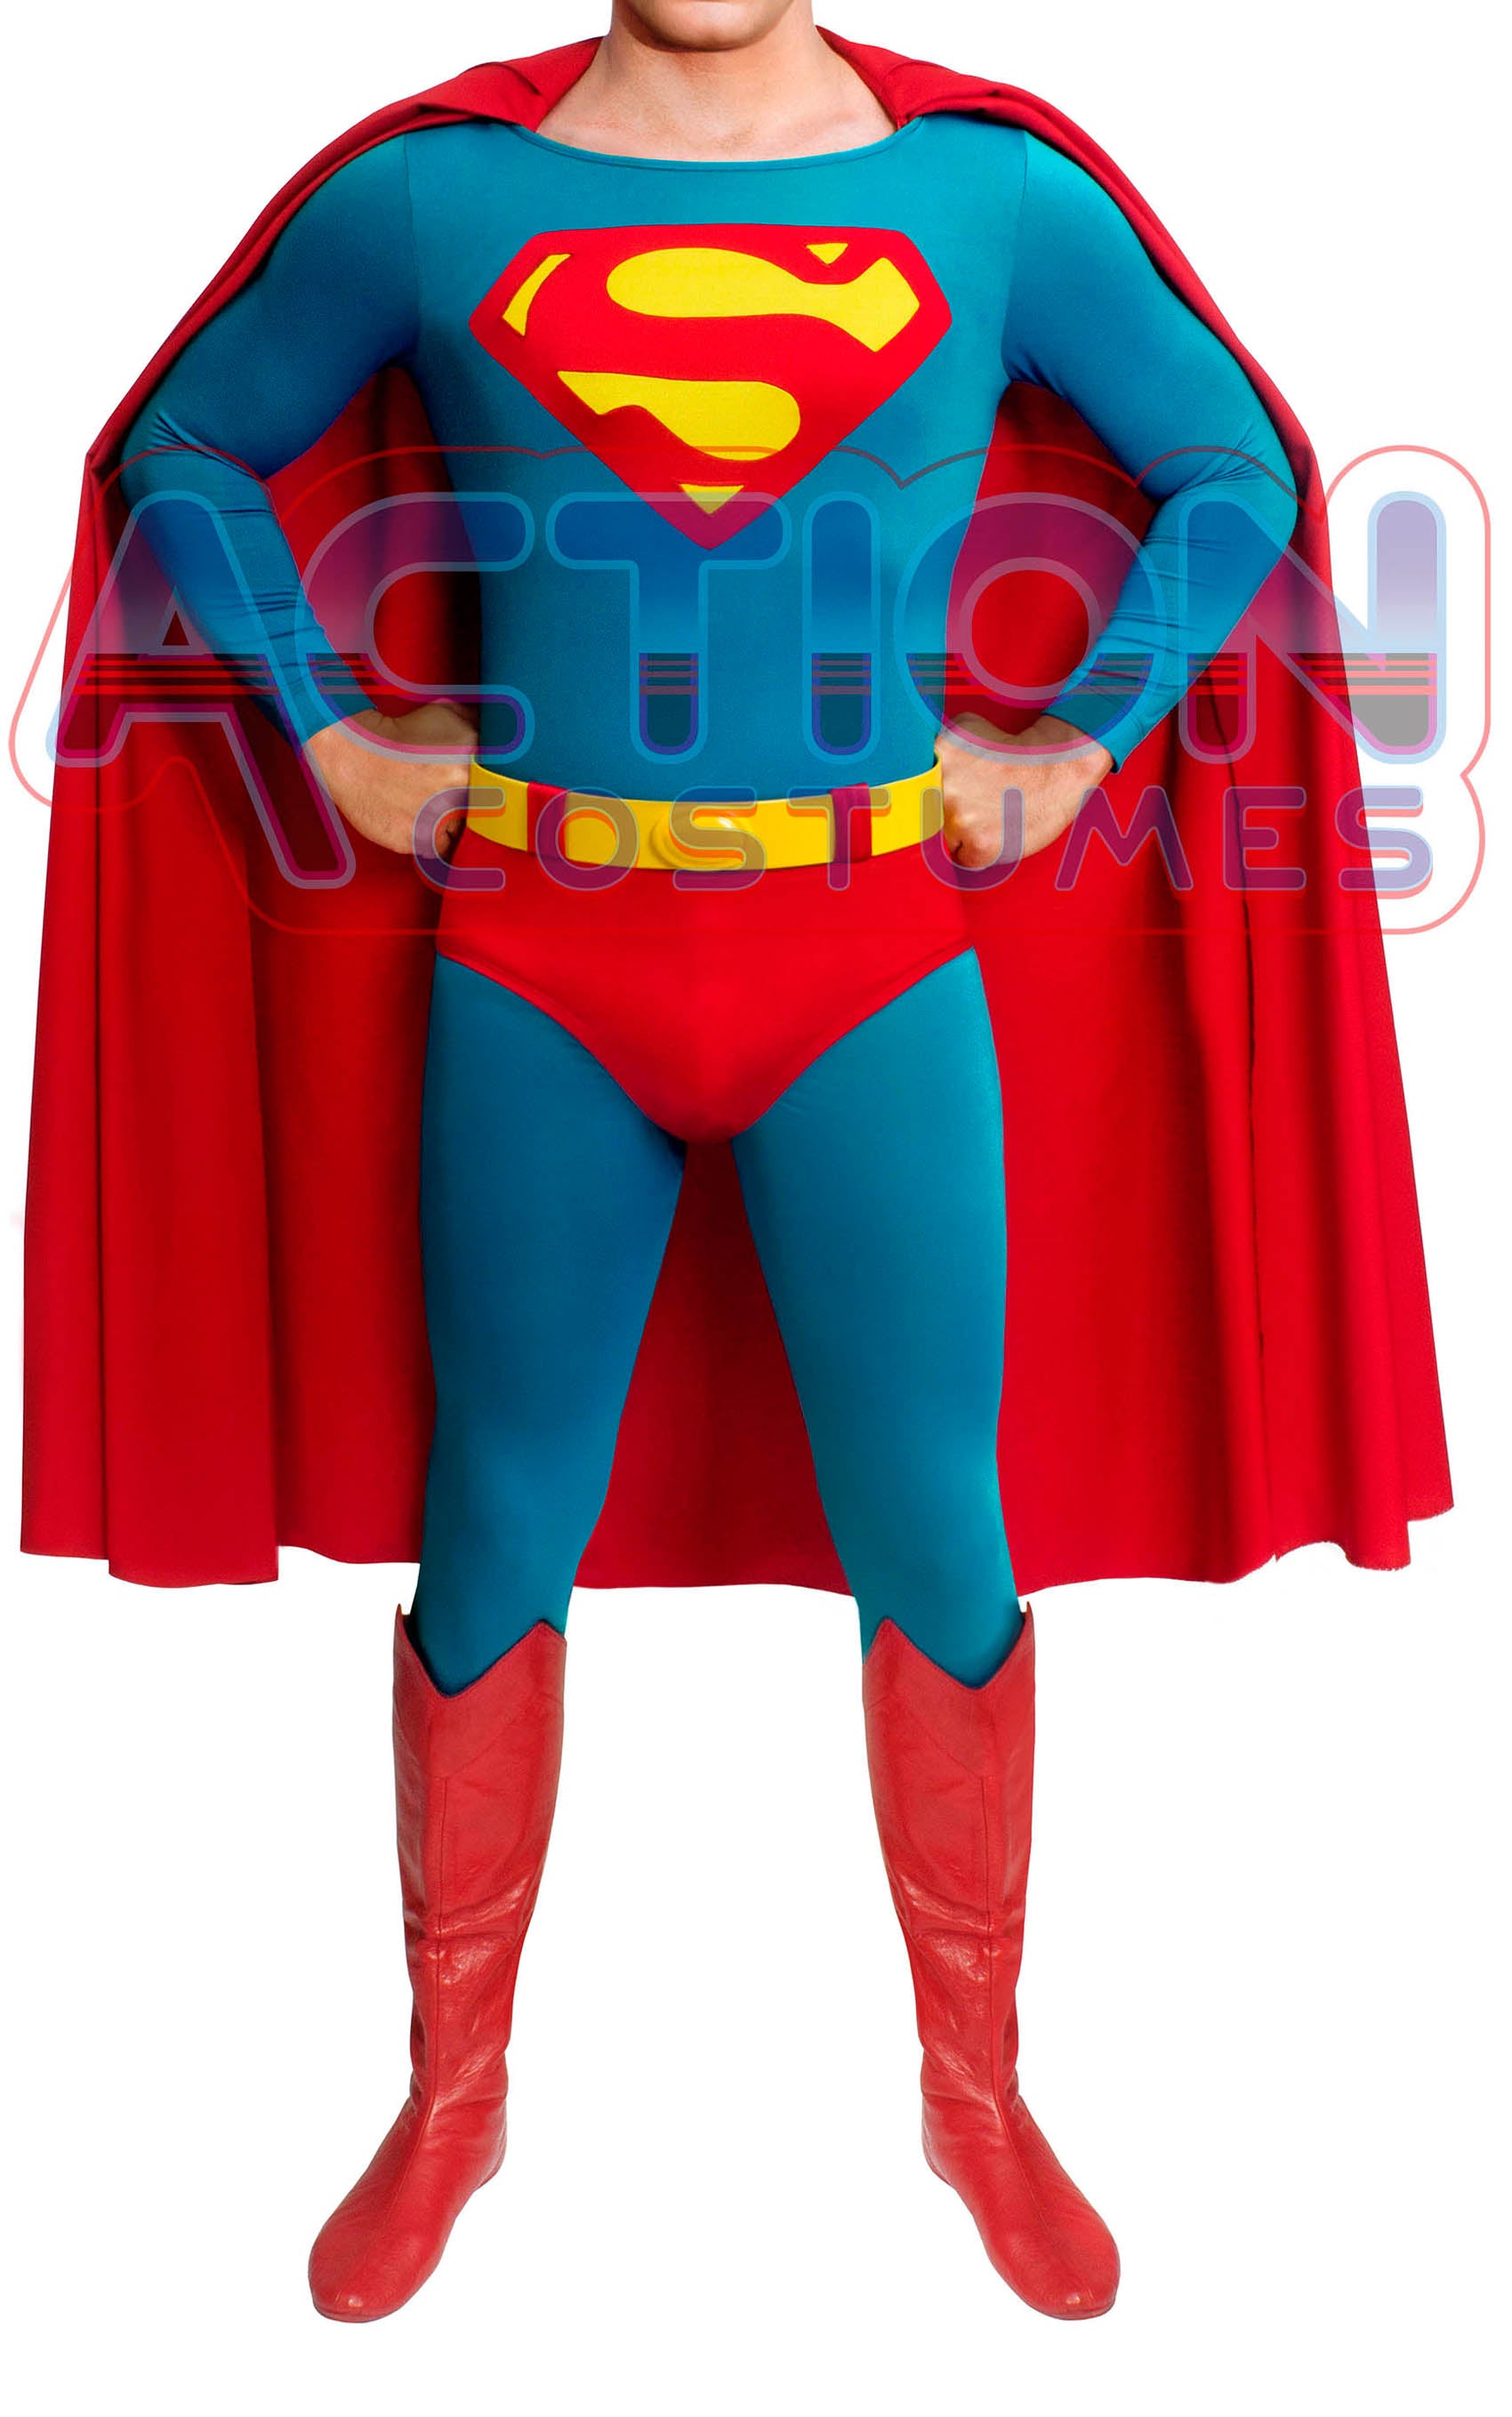 superman-costume-silver-edition-m-size-ready-to-ship